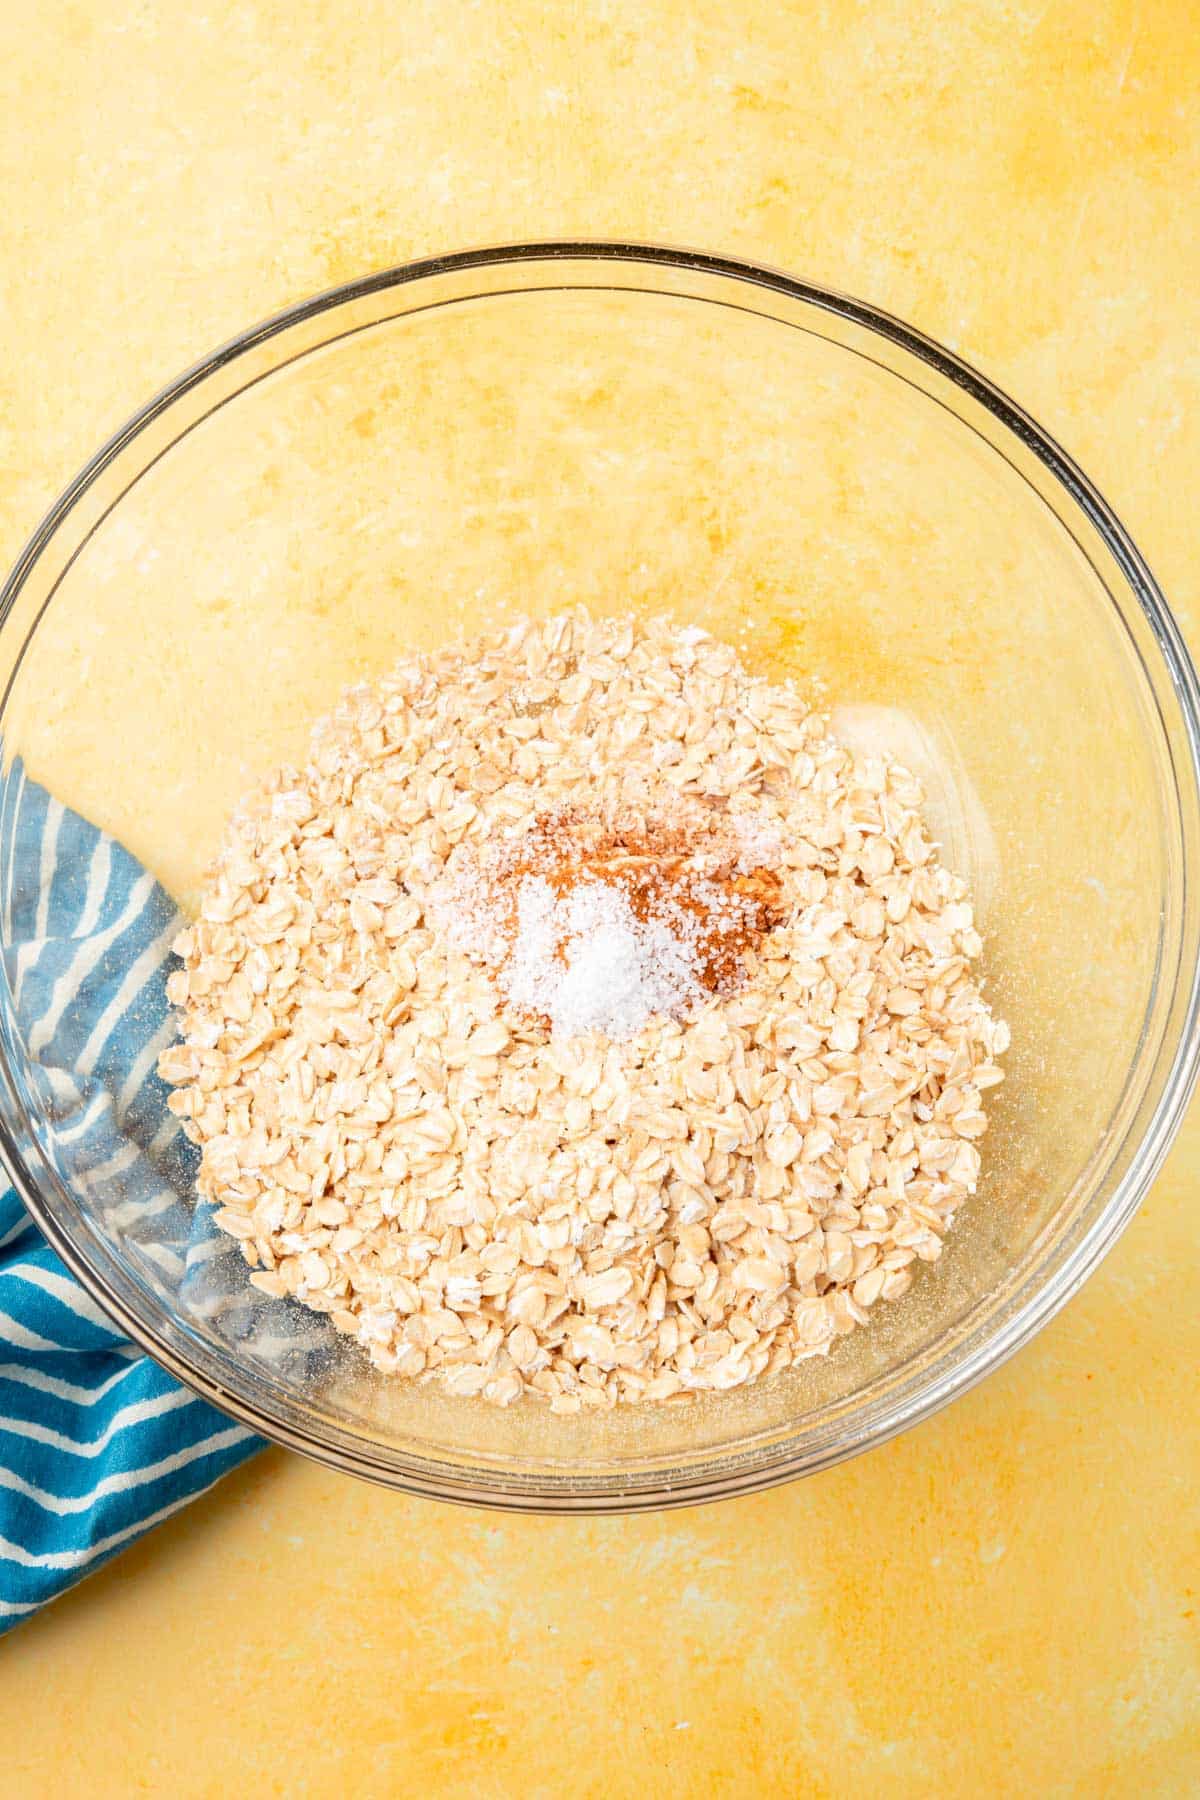 A glass mixing bowl filled with gluten-free oats, salt, baking powder, and cinnamon that has not yet been mixed together.